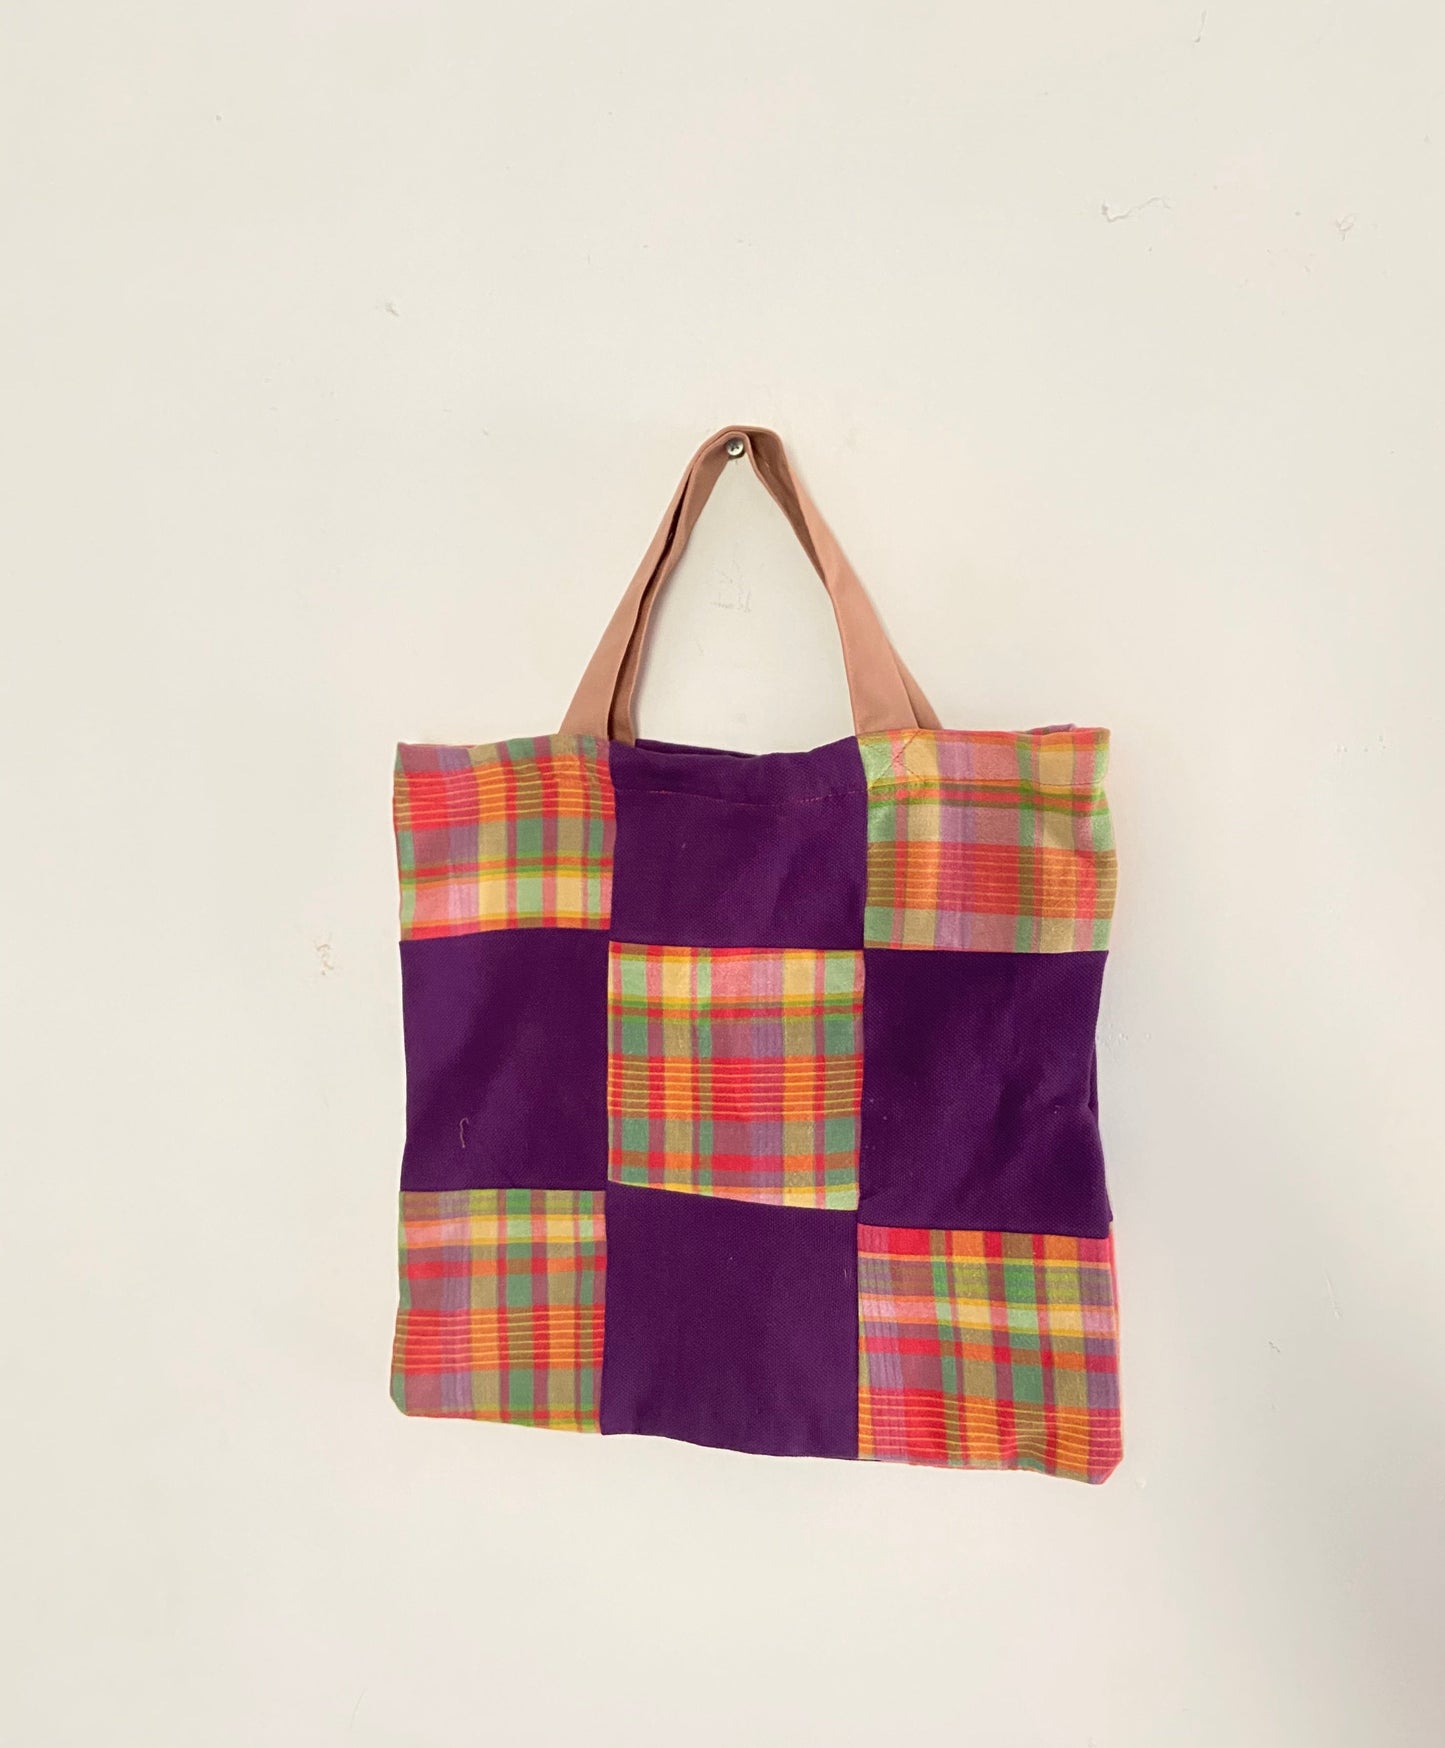 mini-tote-bag-upcycled-and-handmade-purple-front